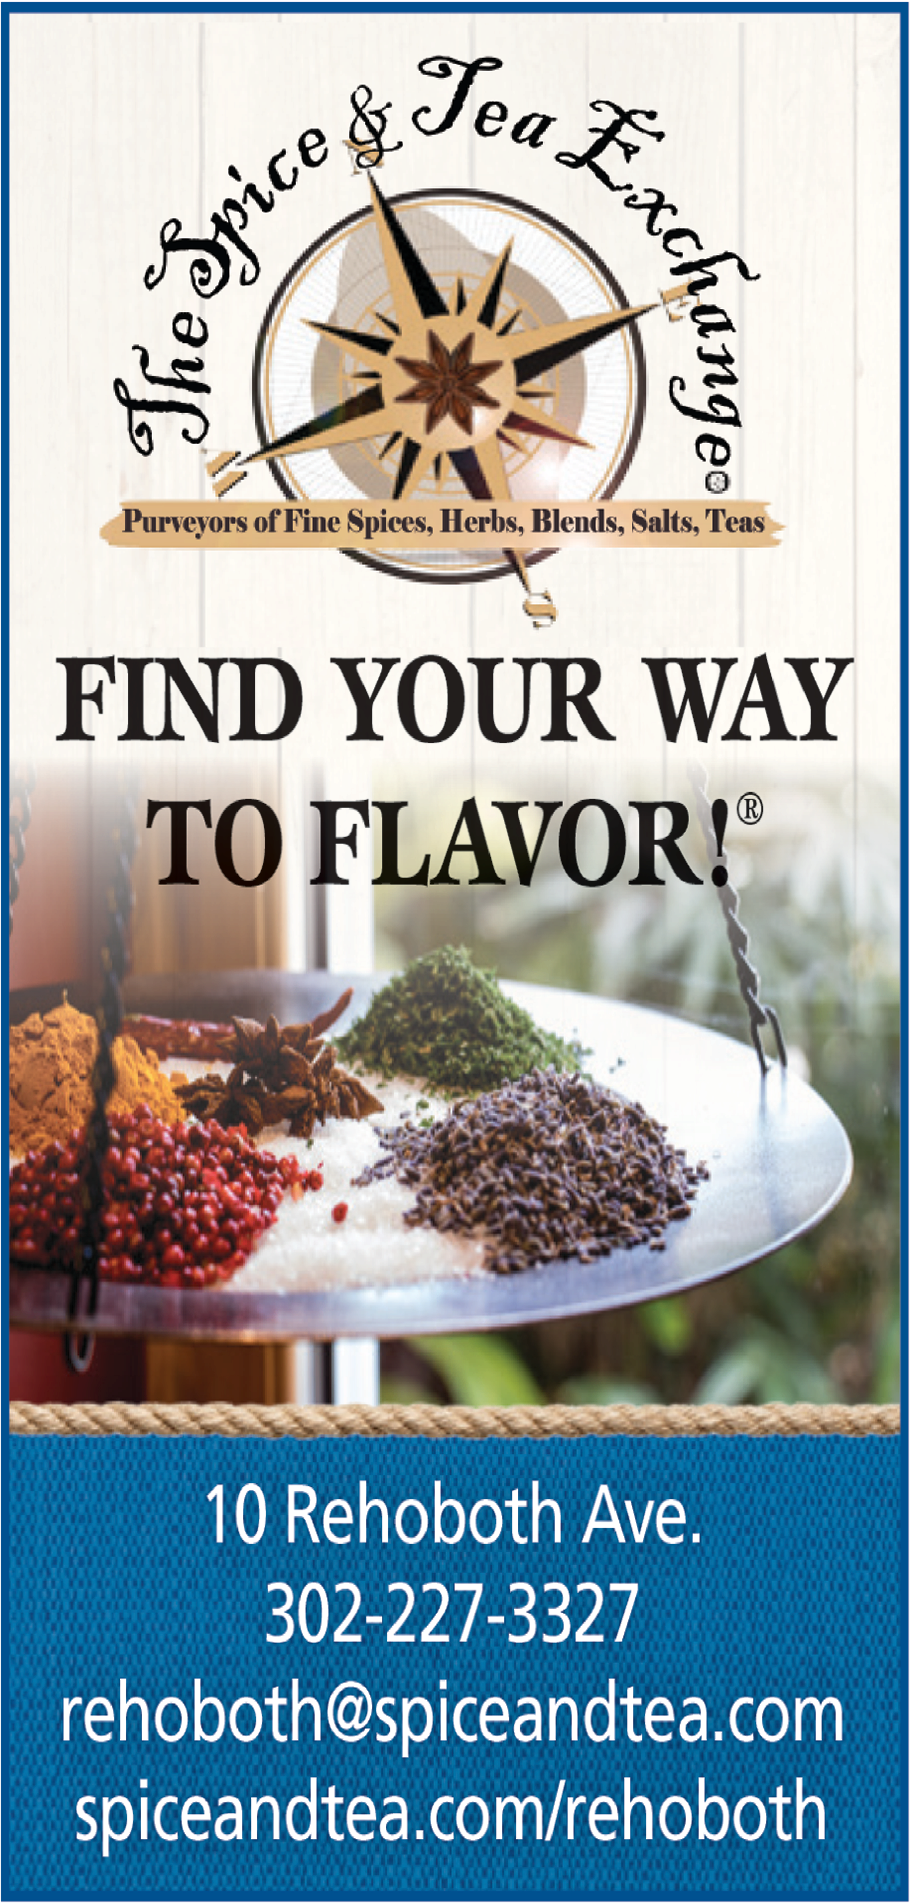 The Spice and Tea Exchange Print Ad